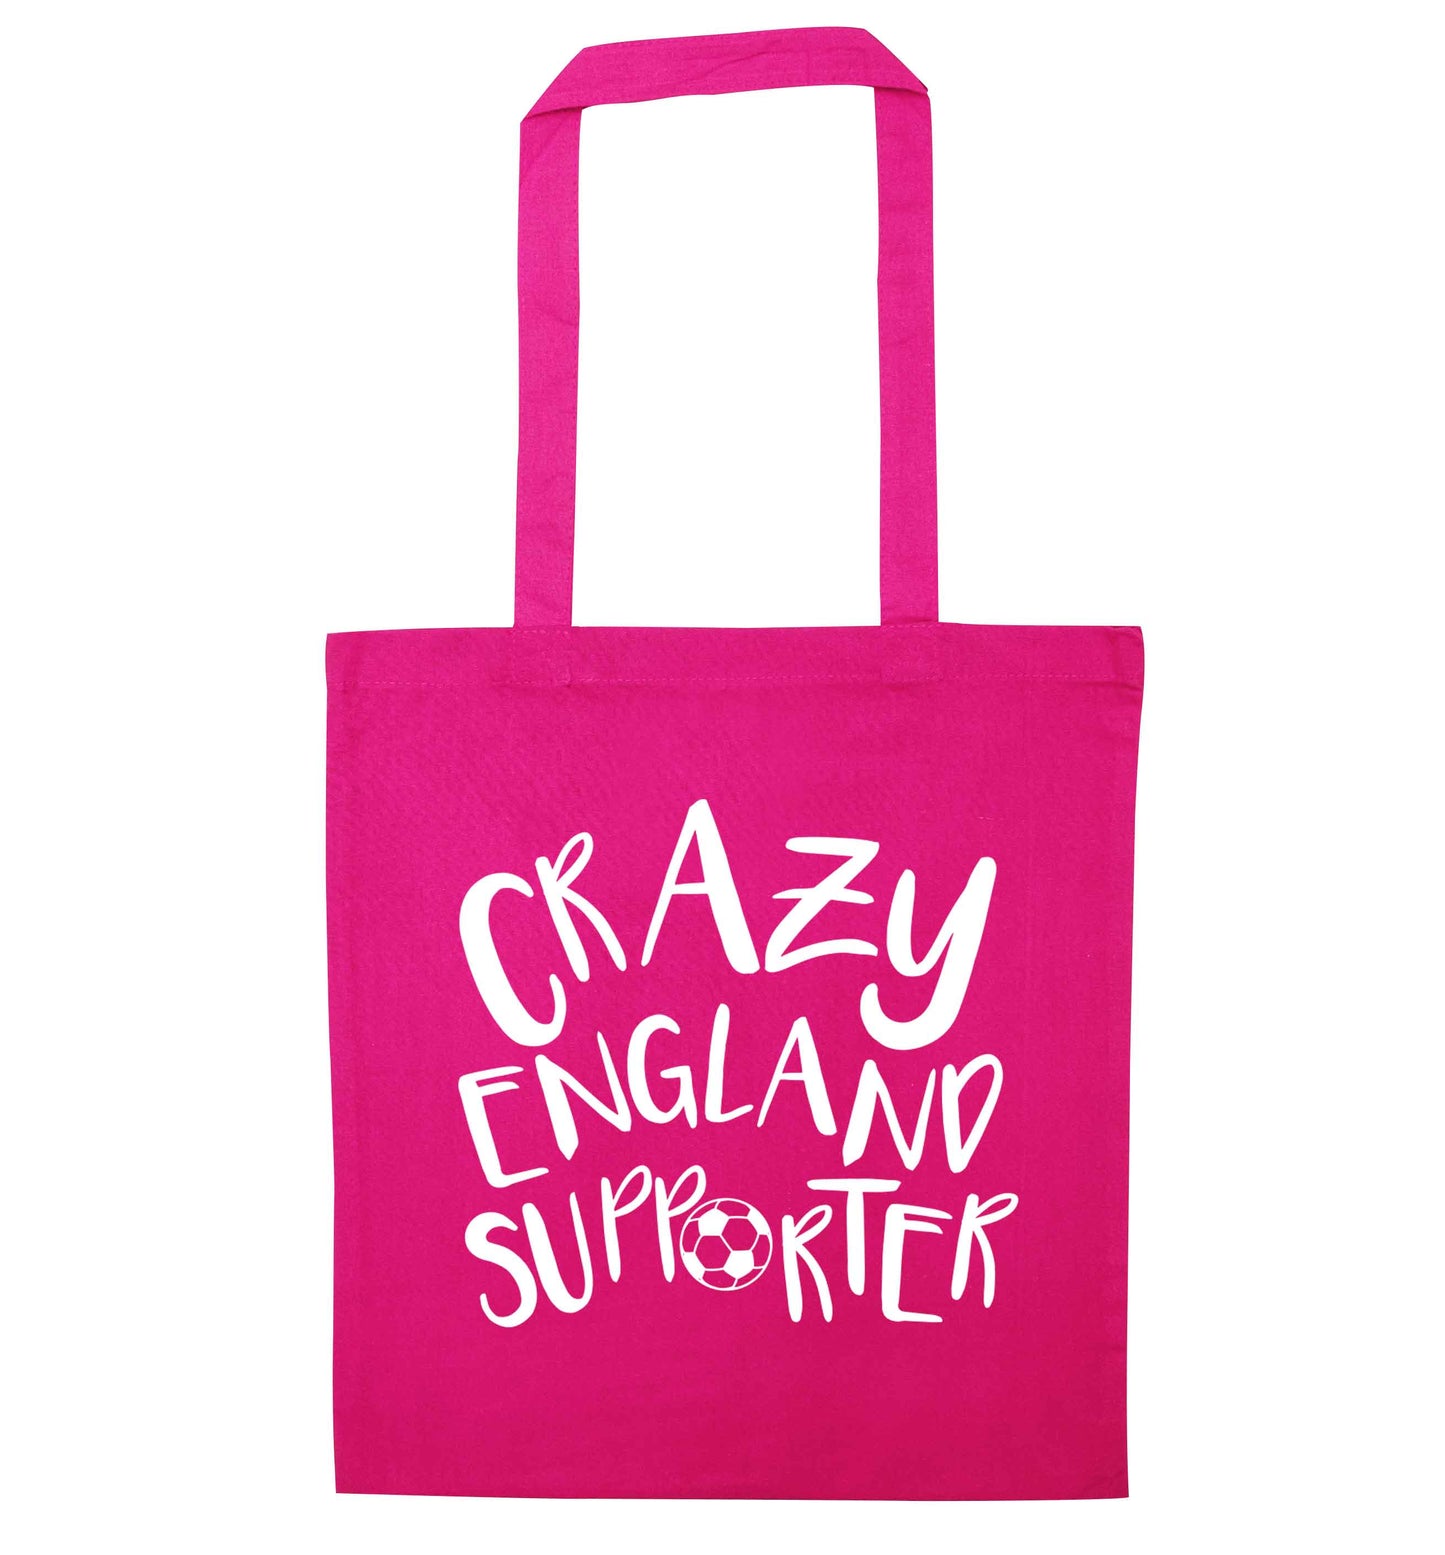 Crazy England supporter pink tote bag